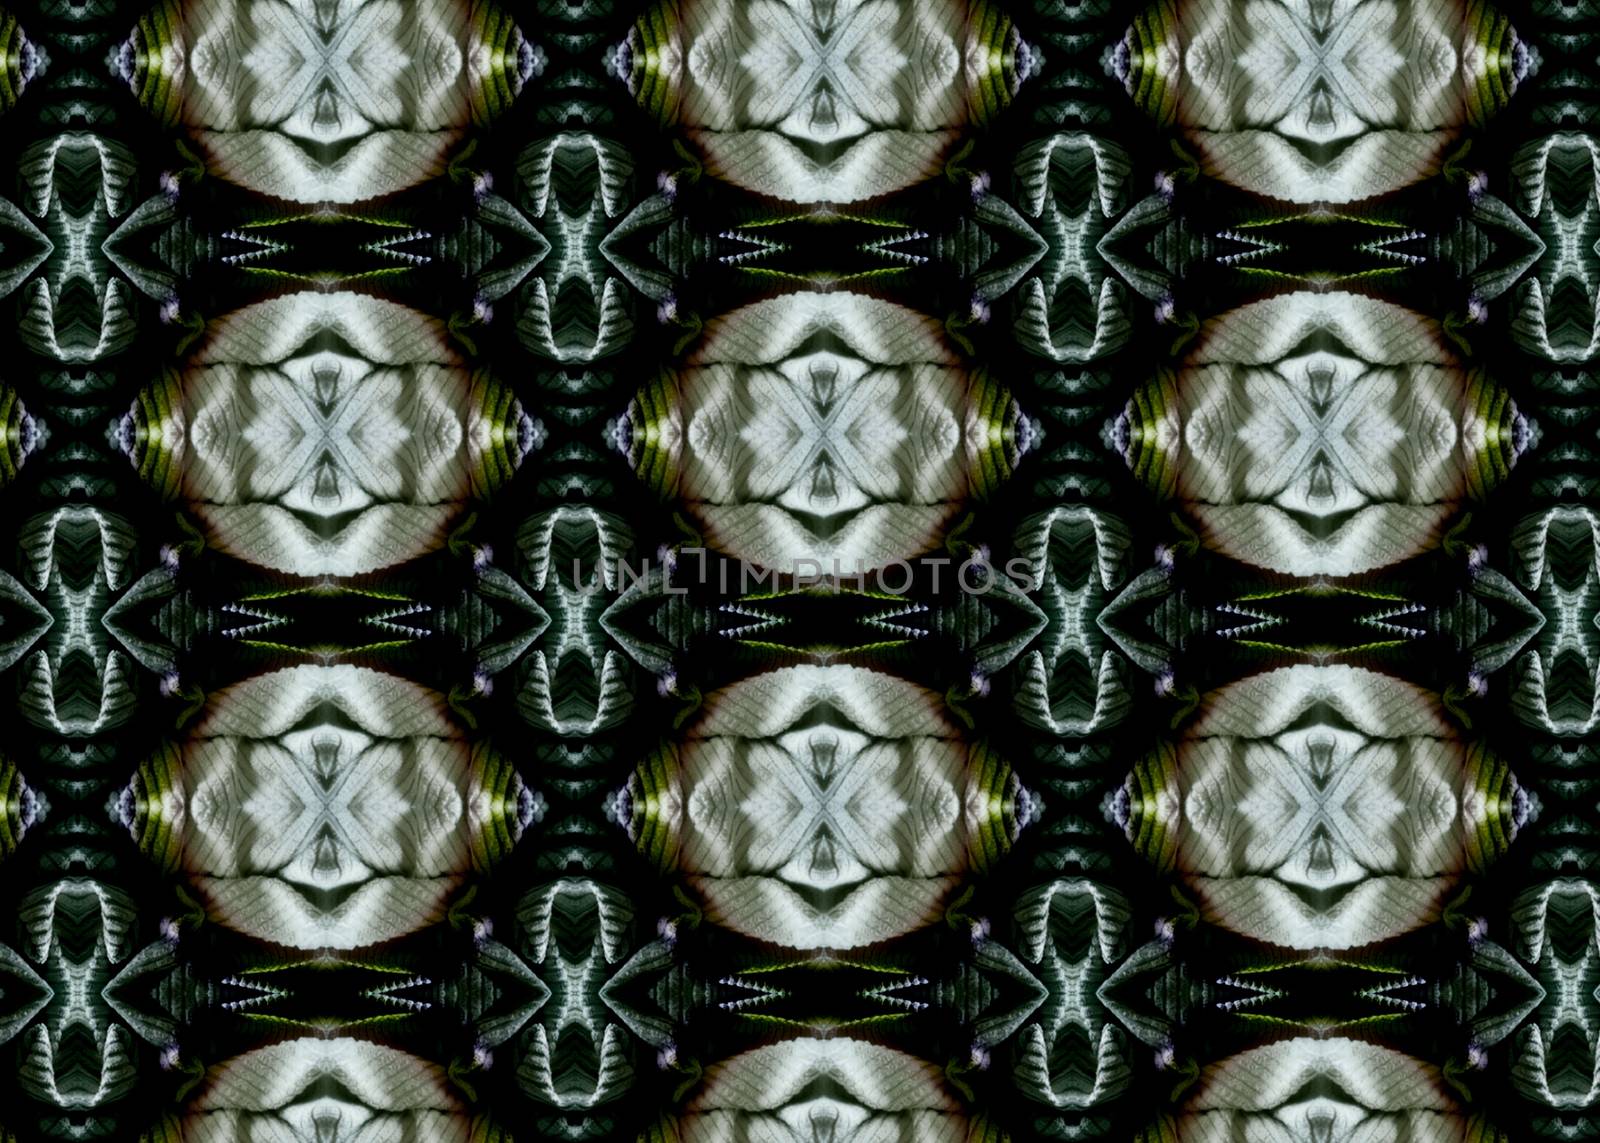 A photographic pattern with metallic feel and vibe